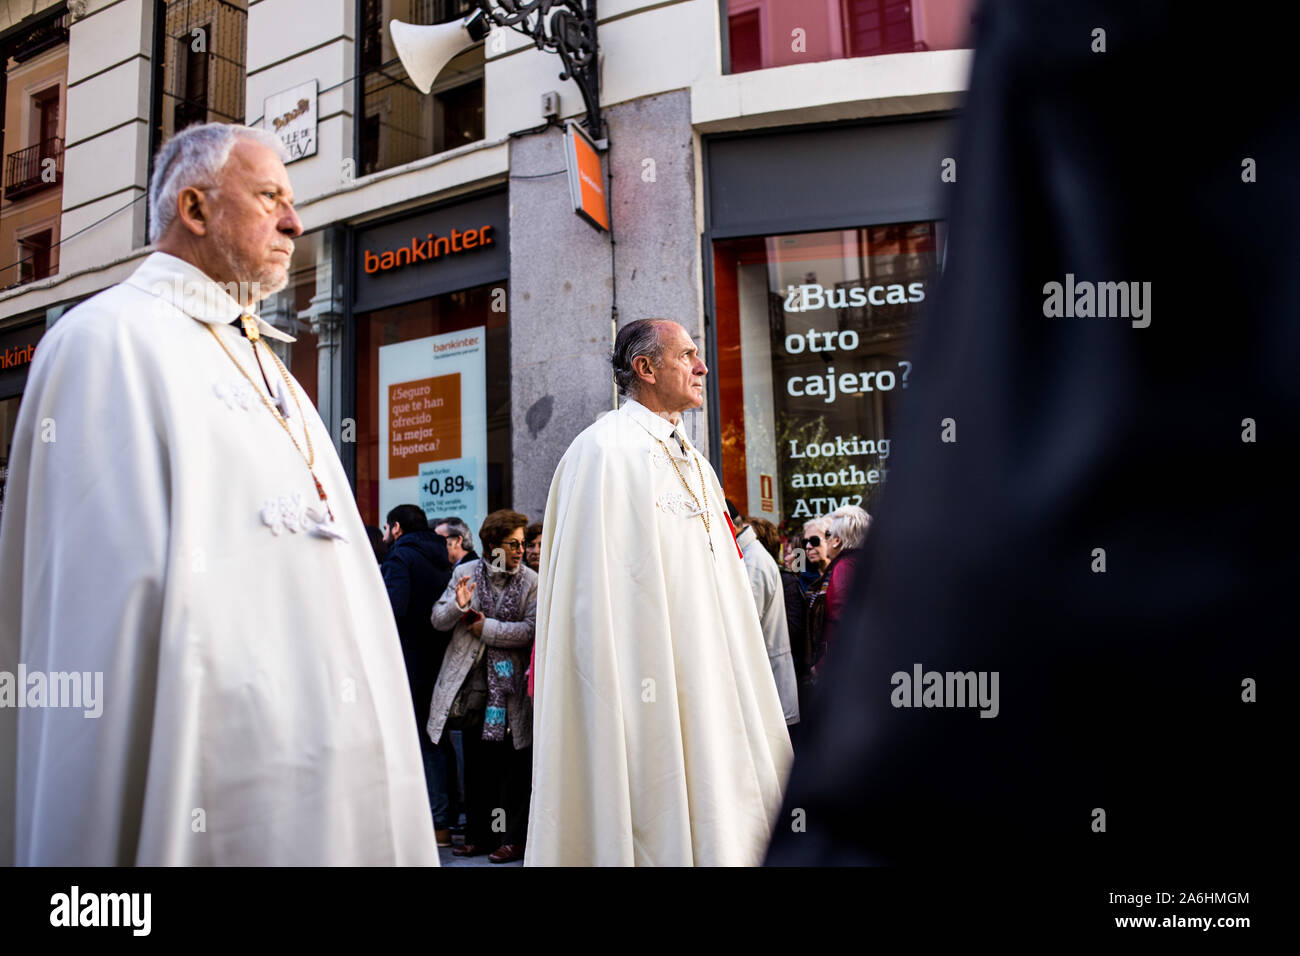 Catholic priests during the procession. Virgin Almudena procession happens through the streets of Madrid where the saint patron of the capital of Spain is carried from Plaza Mayor to Almudena's Cathedral. Hundreds of catholic congregations join the procession to honour the virgin. Stock Photo